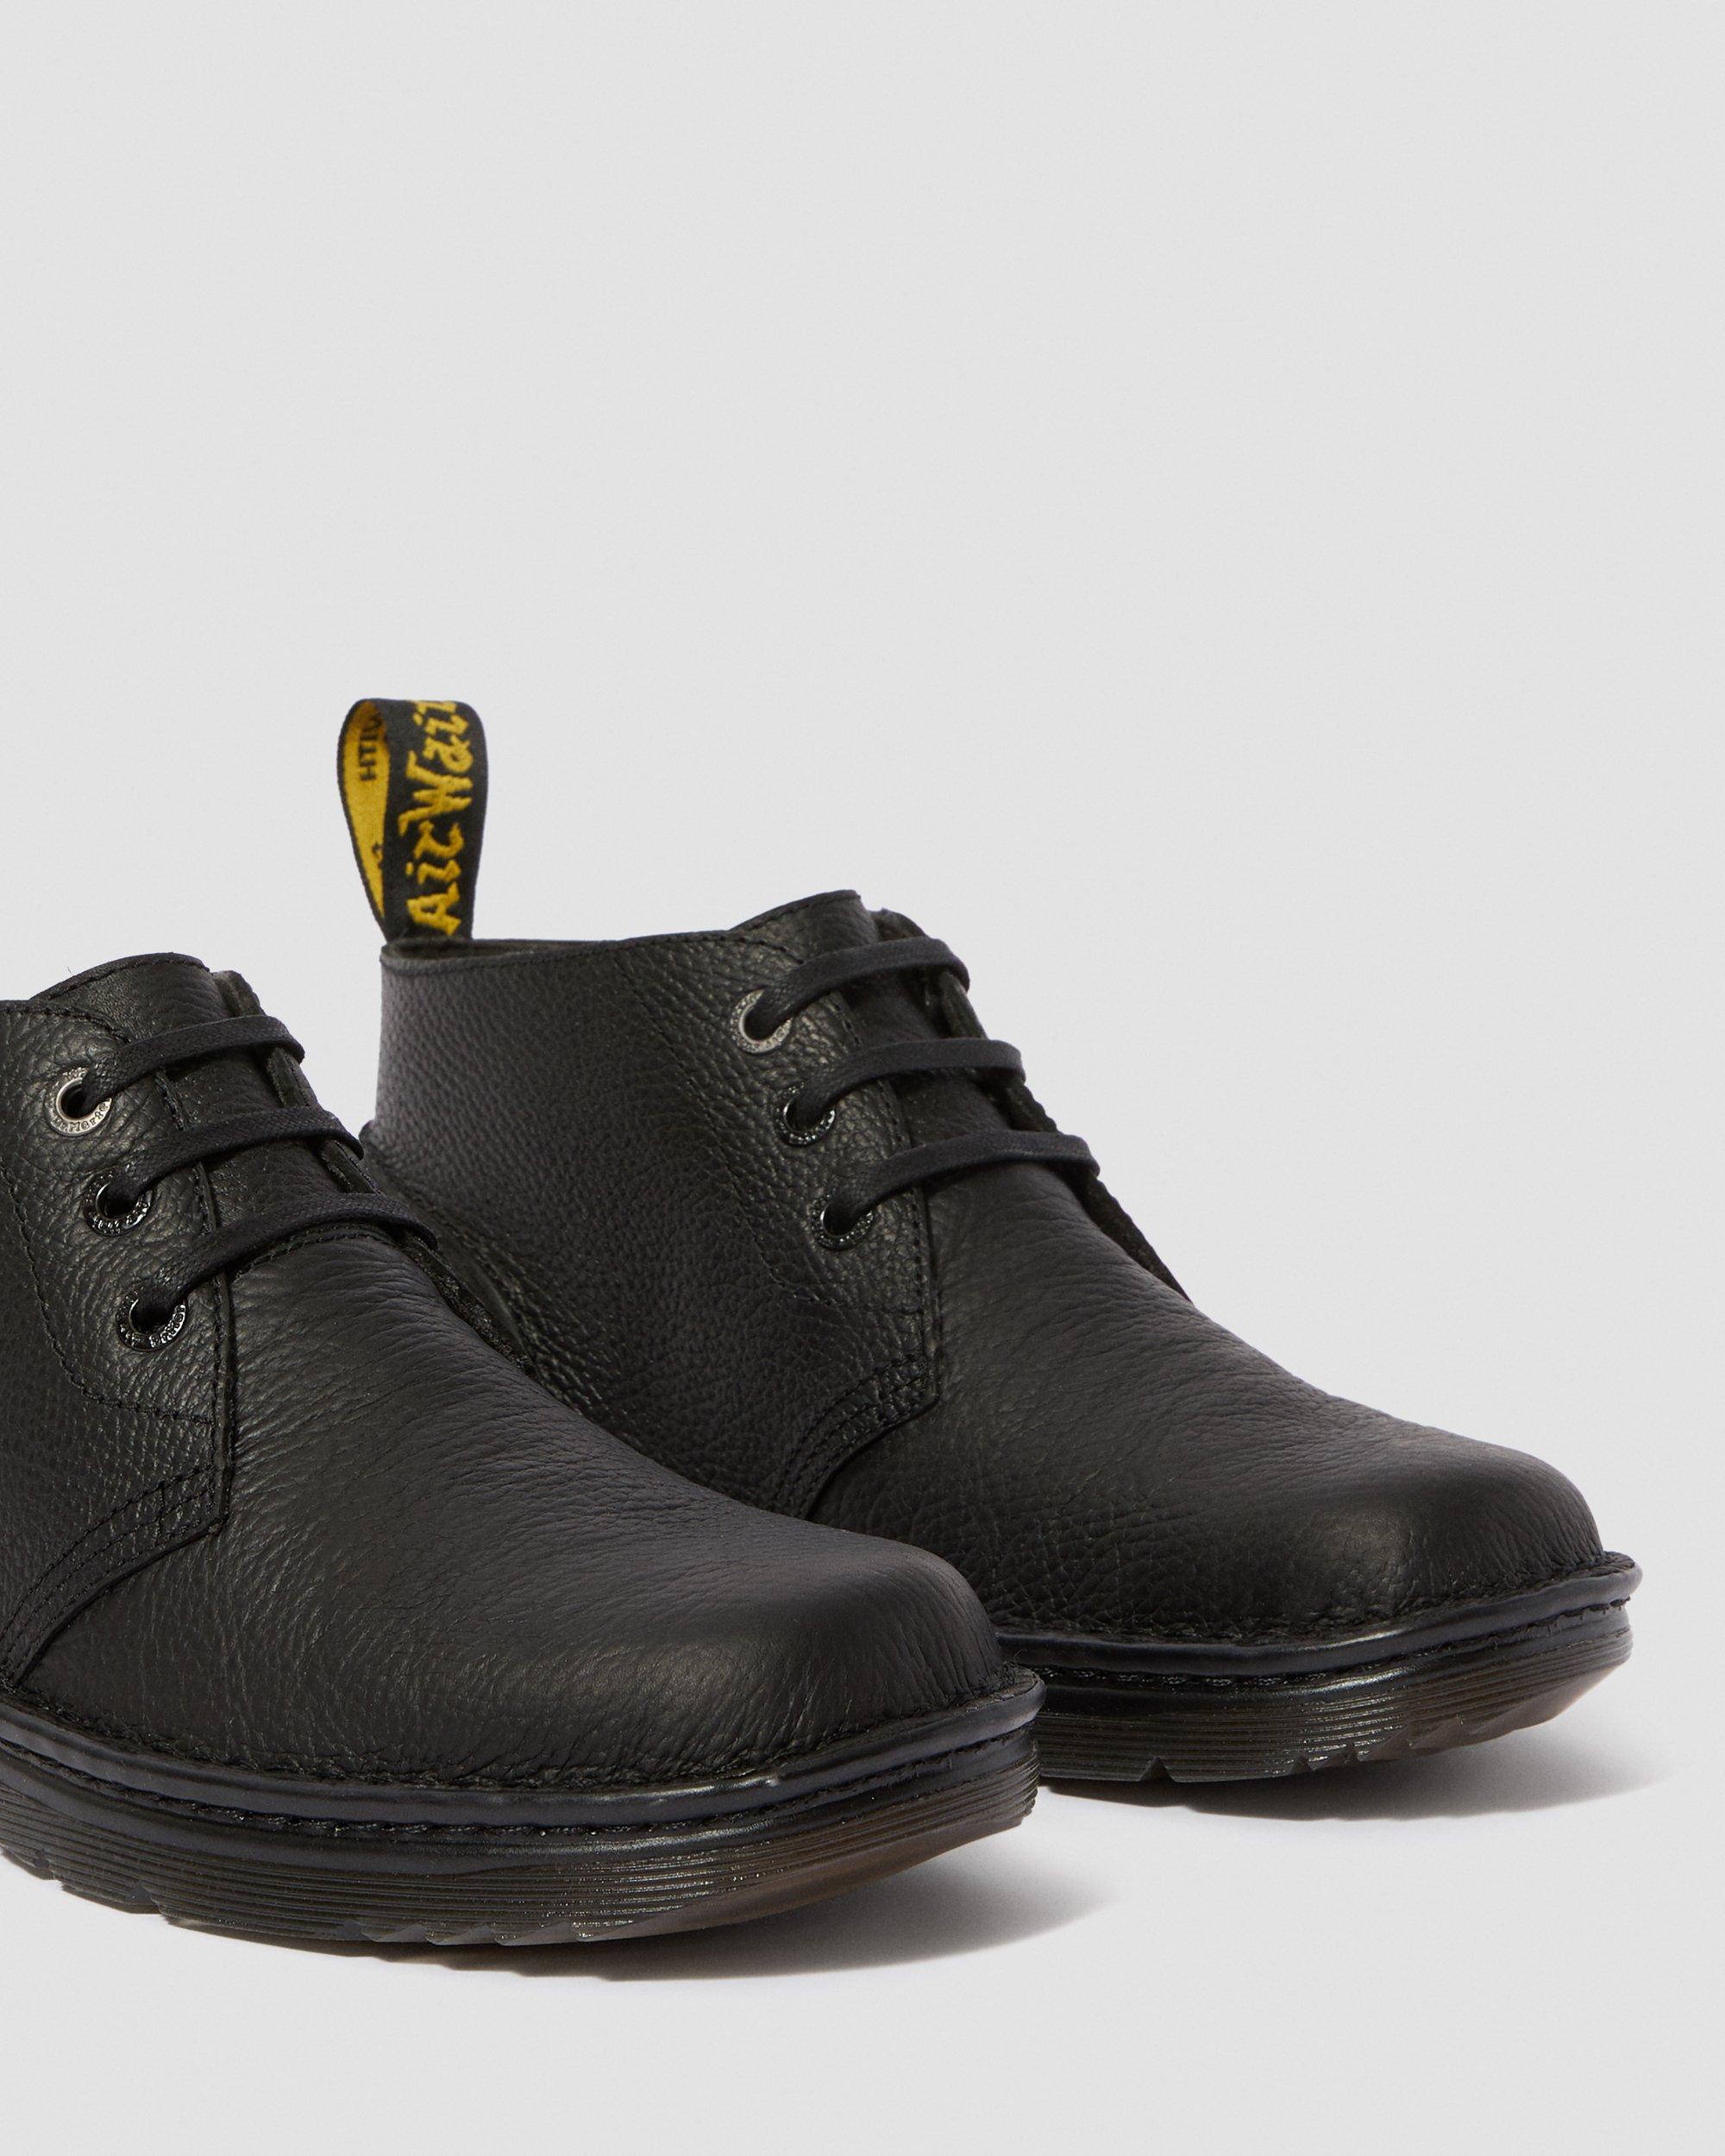 Sussex Bear Track Slip Resistant Chukka Boots in Black | Dr. Martens